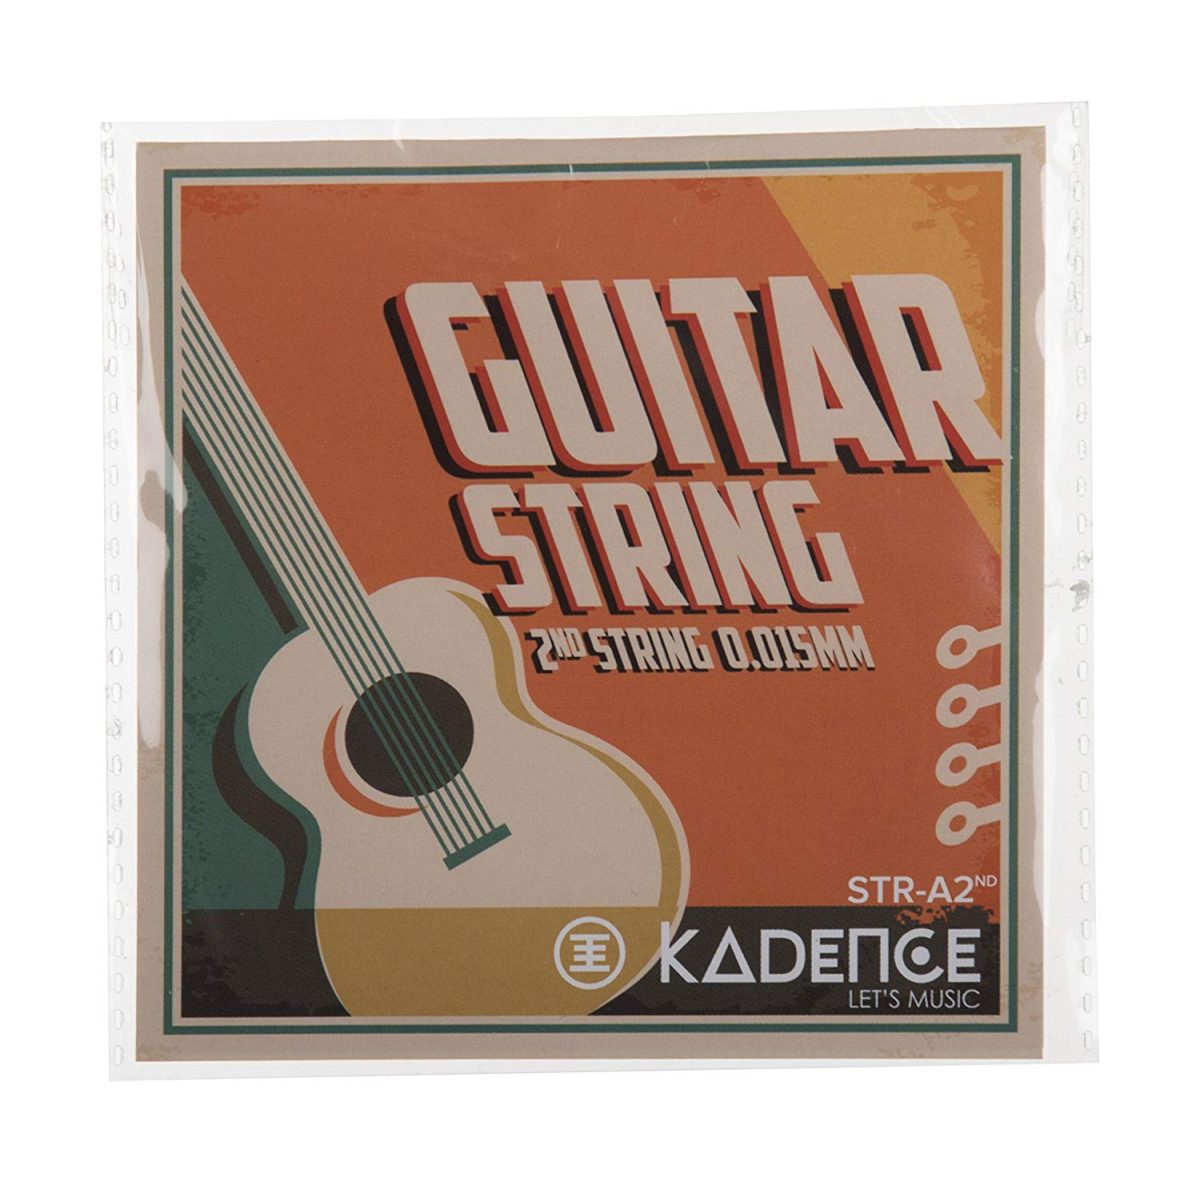 Kadence Acoustic Guitar Single 2nd B String STRA-2ND Pack of 3